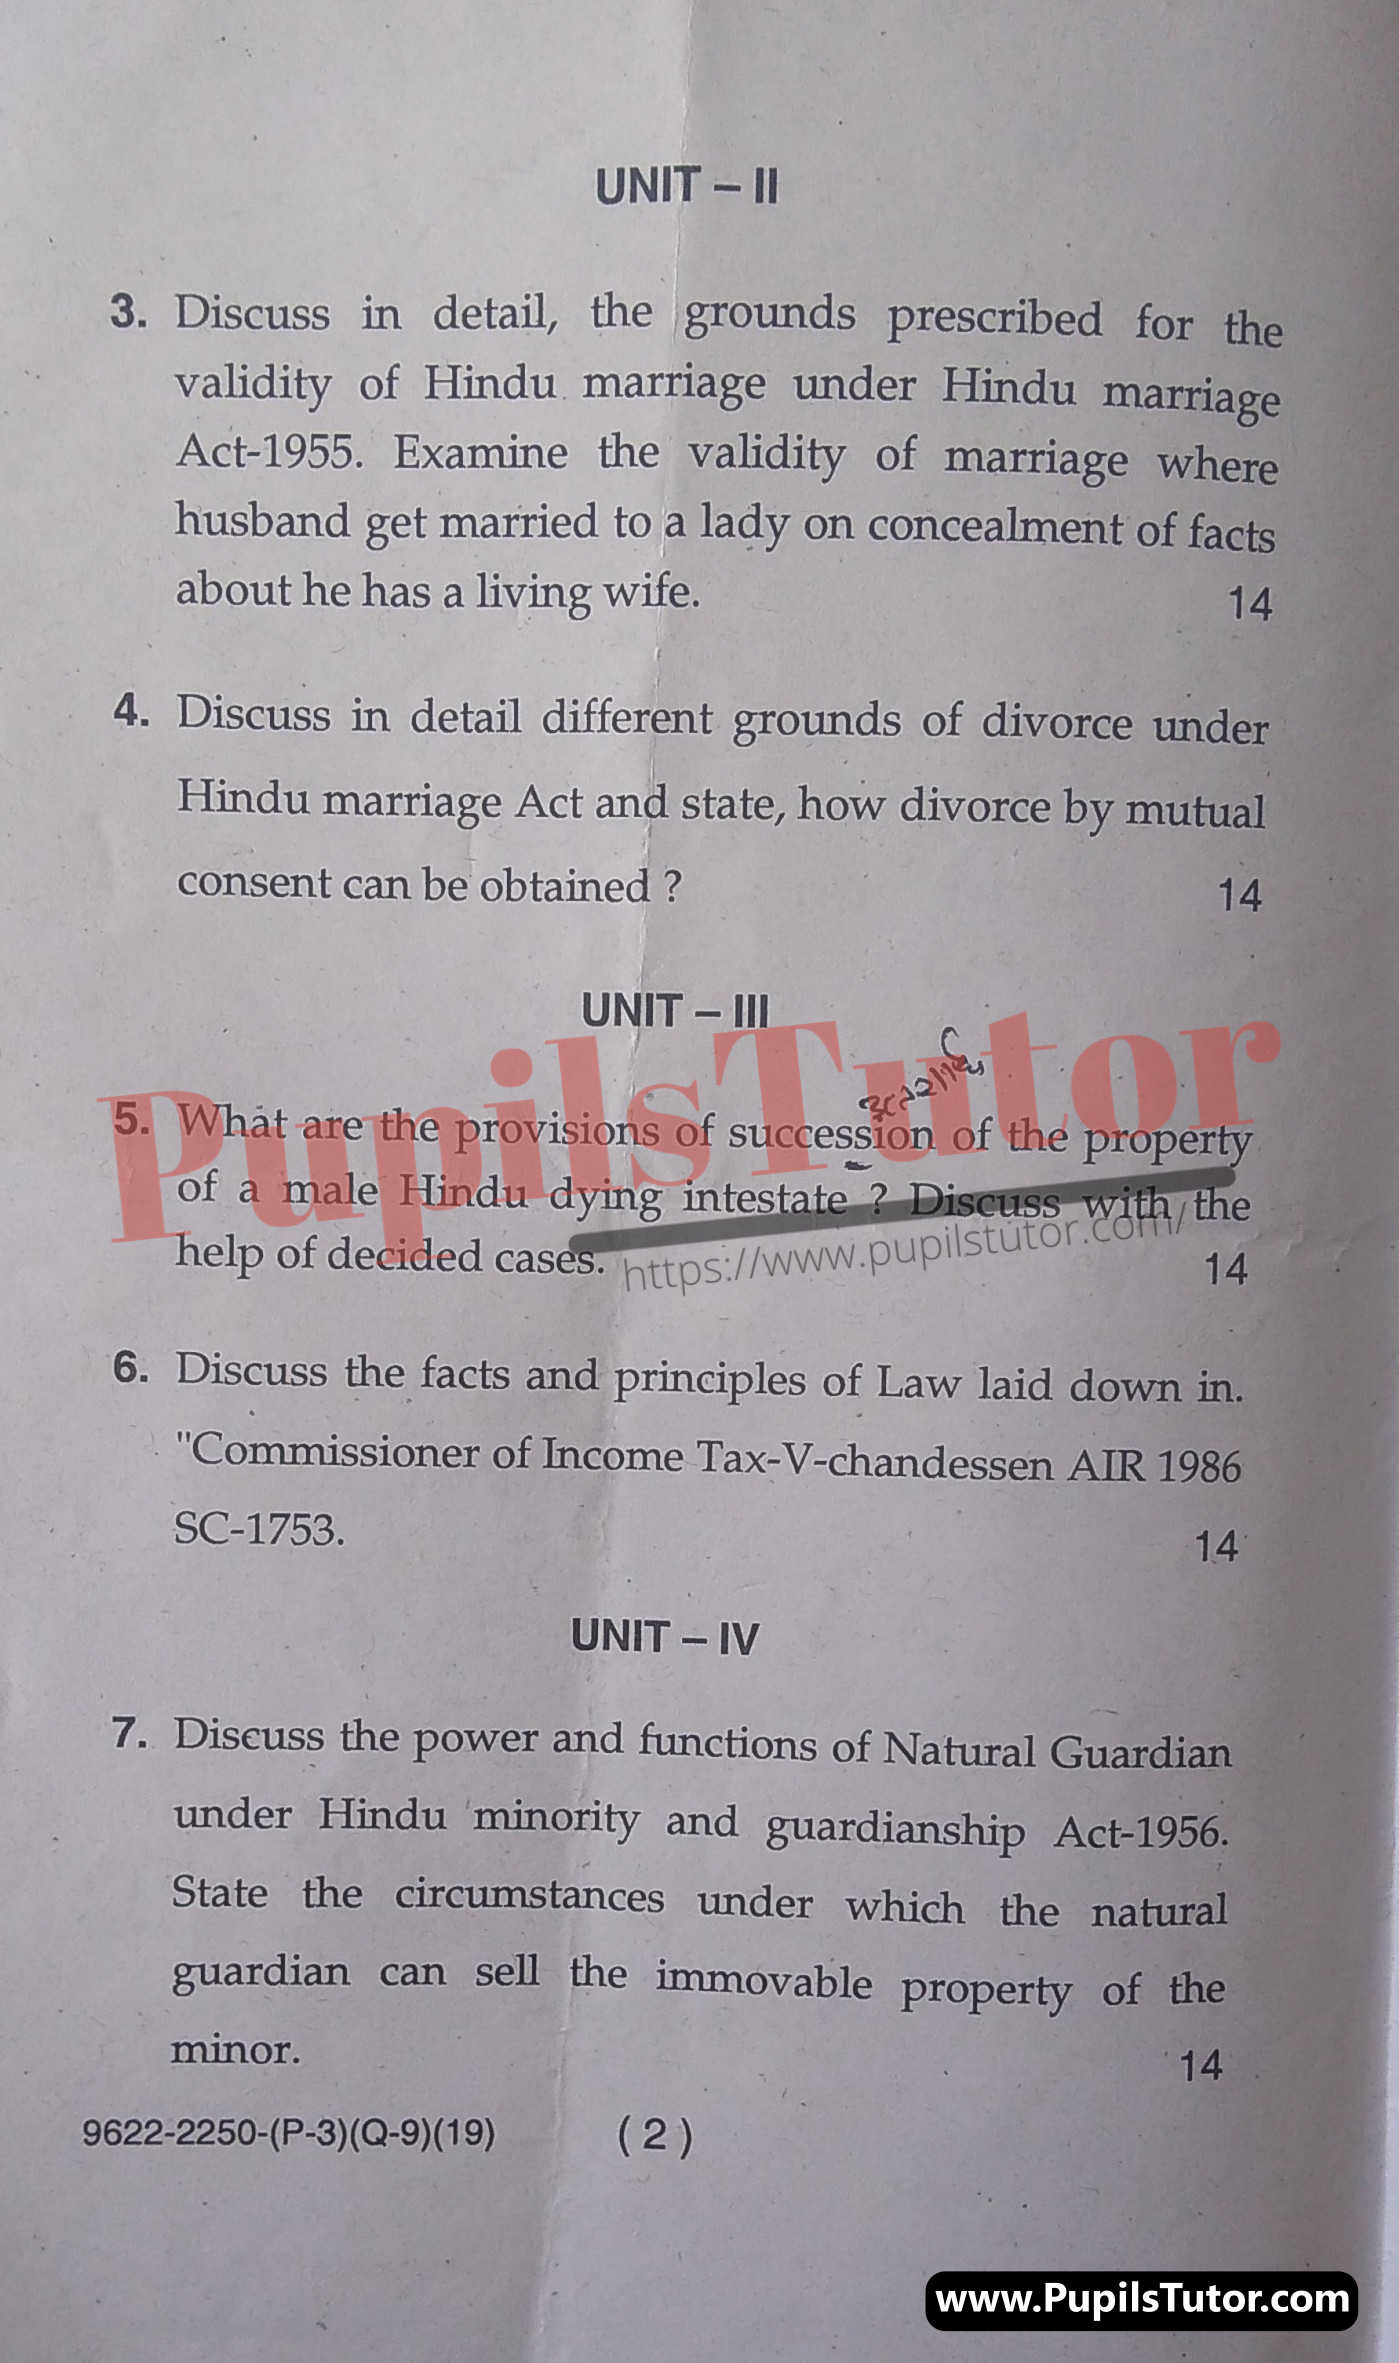 M.D. University LL.B. Family Law - I First Semester Important Question Answer And Solution - www.pupilstutor.com (Paper Page Number 2)